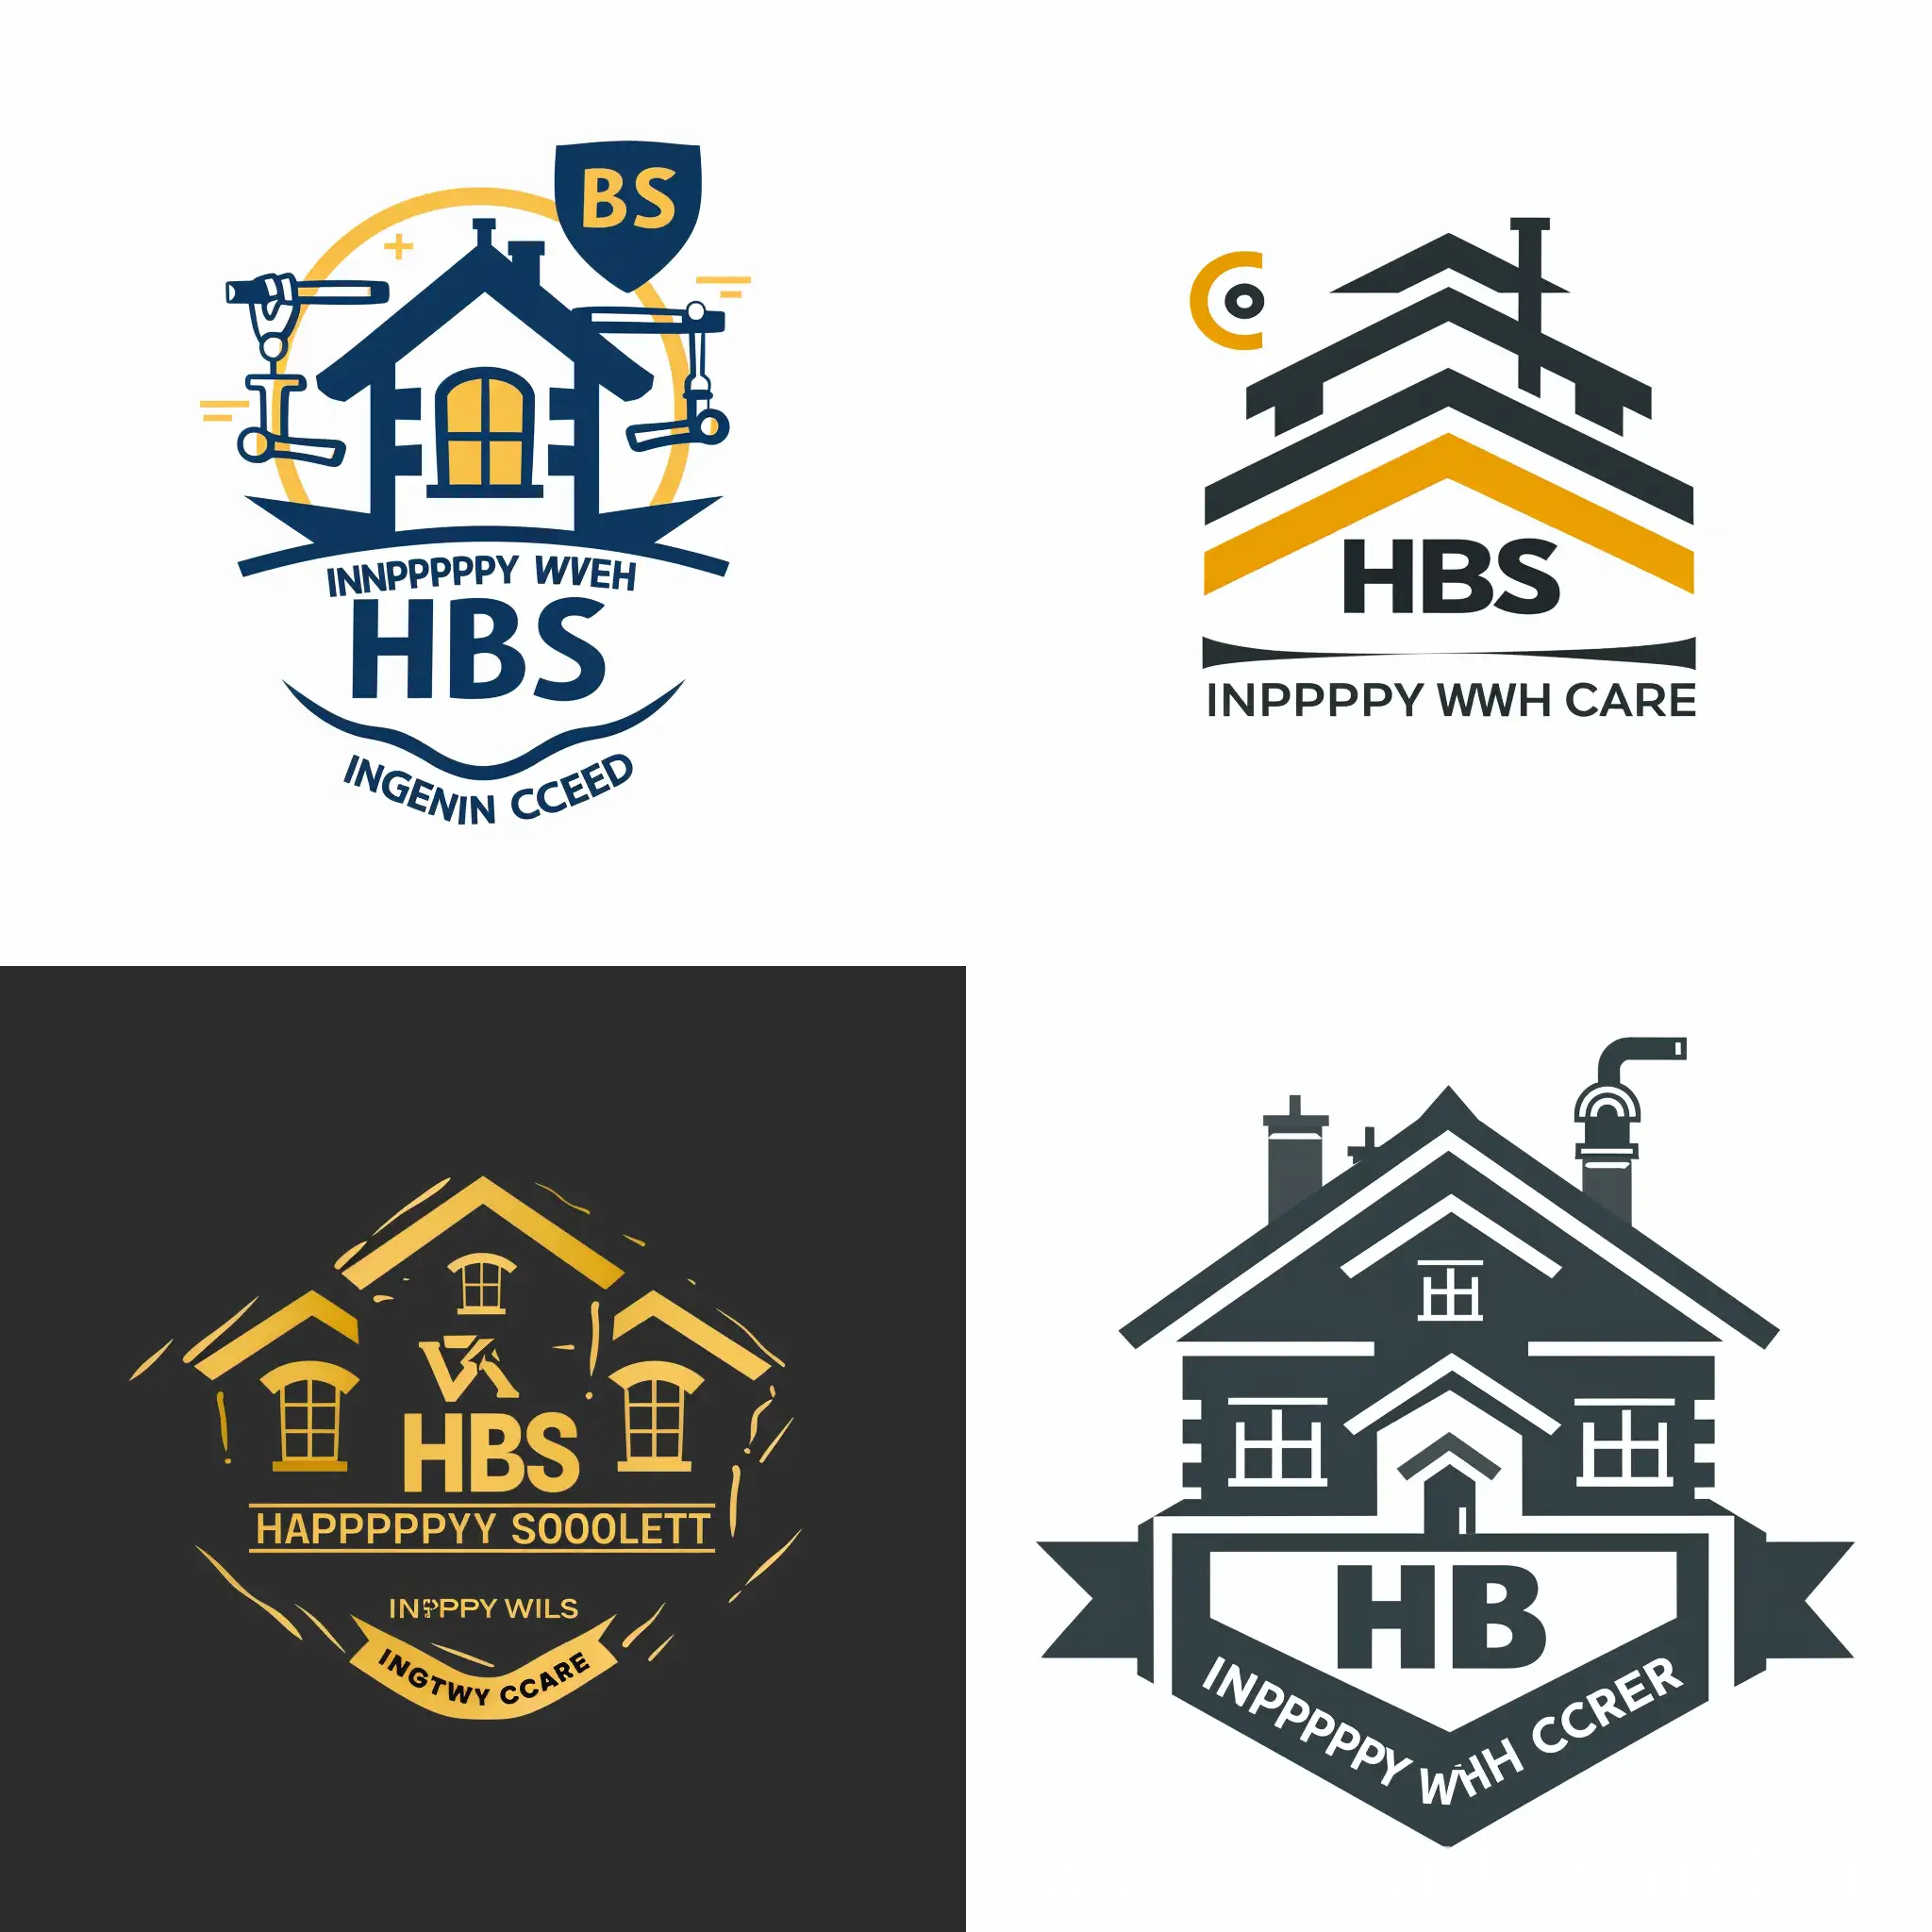 Make a Logo for company name - "Happy Building solutions", with tag line - "Inspected with Care". Use House and inspection as keywords to make the logo and also embed the words - "HBS" in the logo